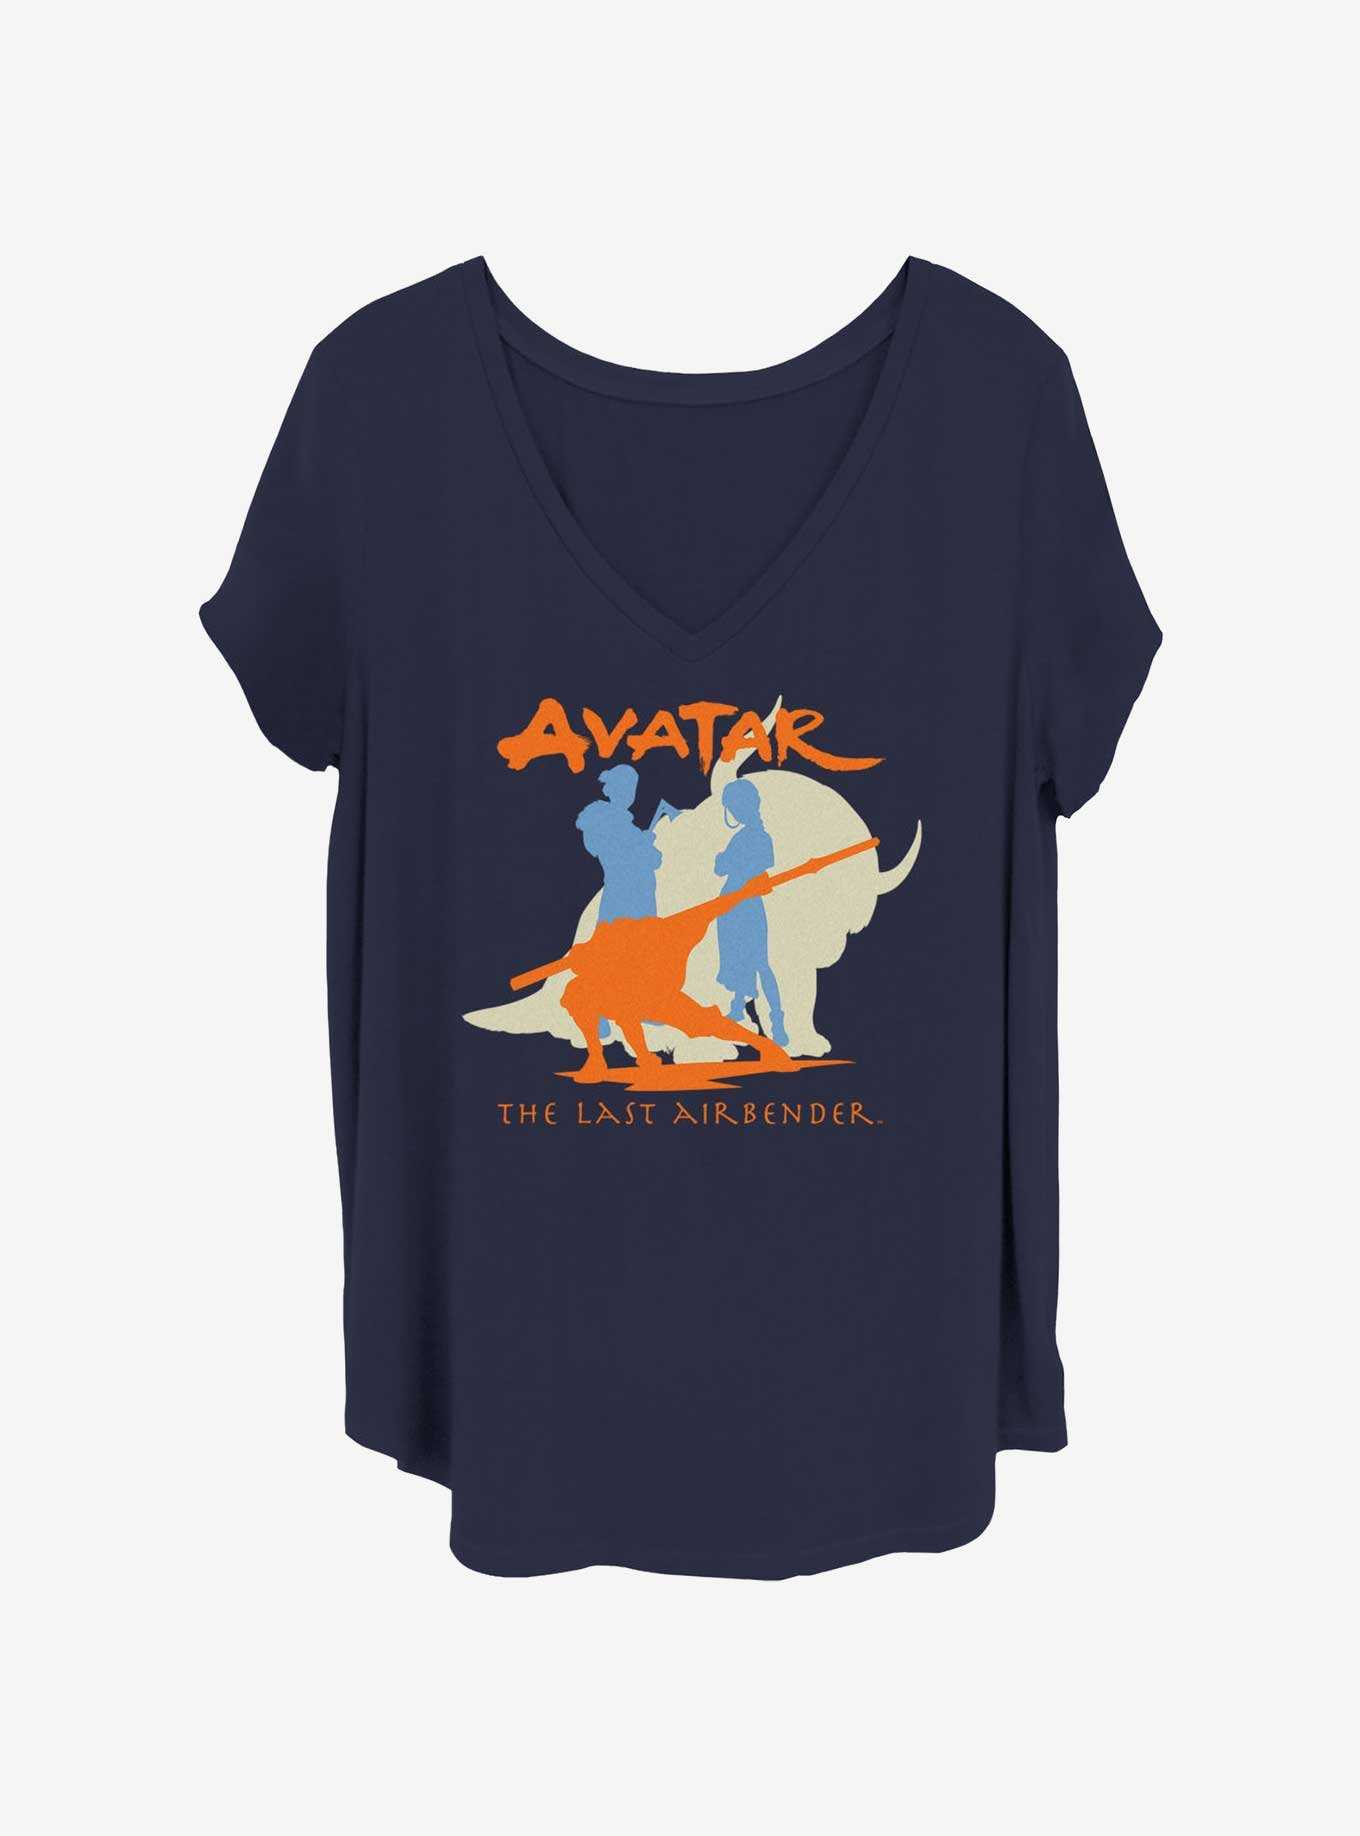 Avatar: The Last Airbender Silhouette Girls T-Shirt Plus Size, , hi-res